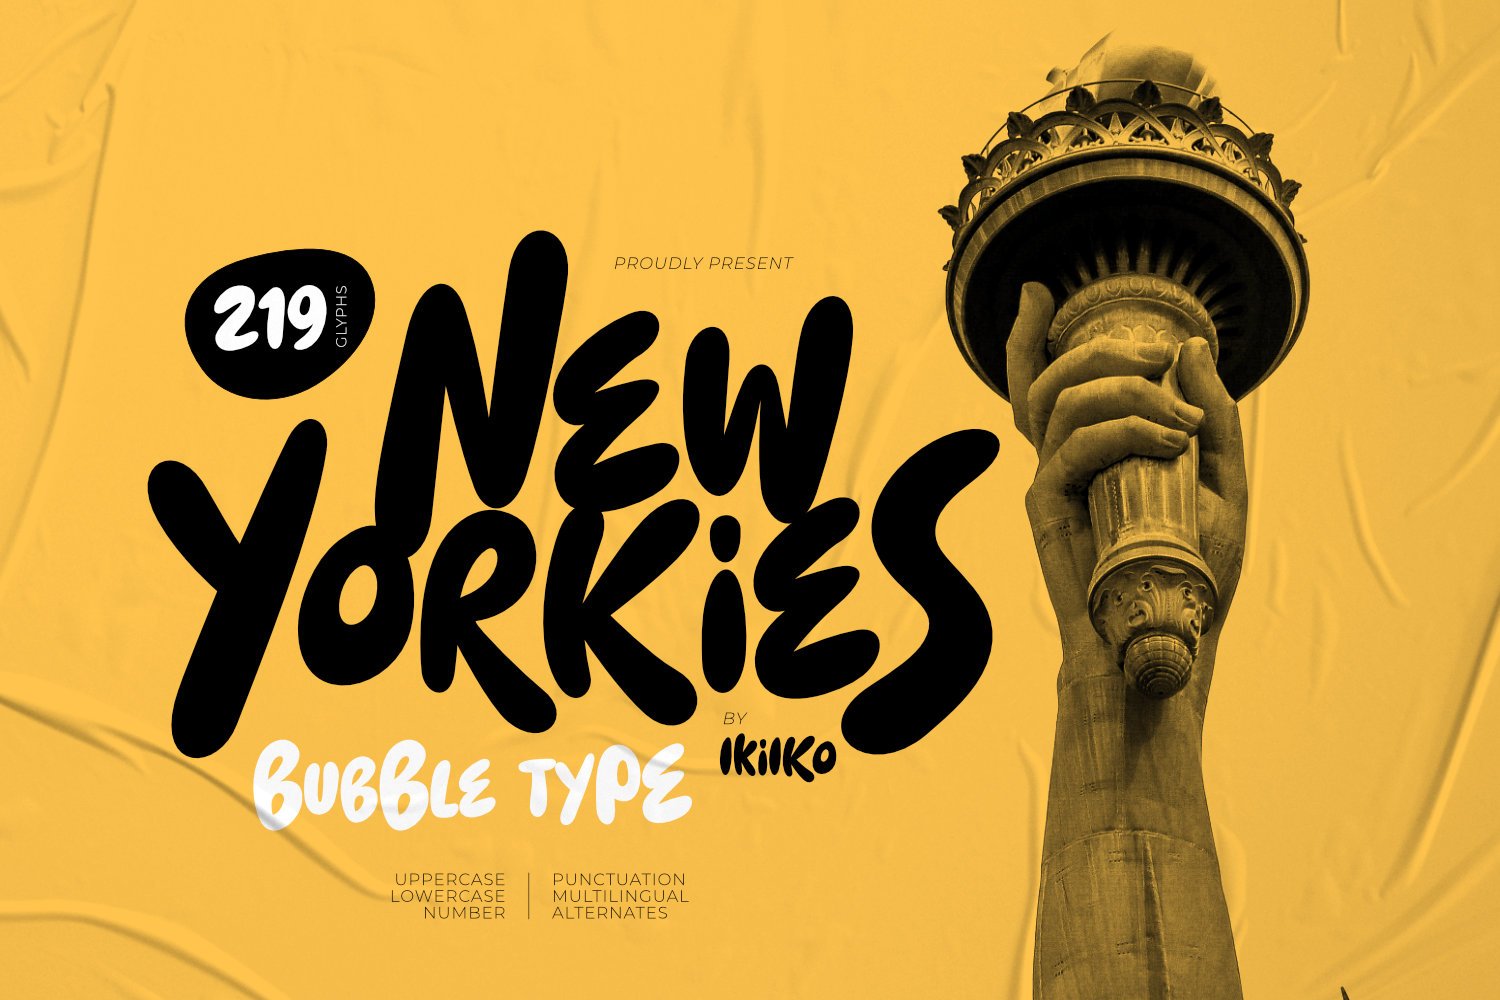 New Yorkies - Bubble Type cover image.